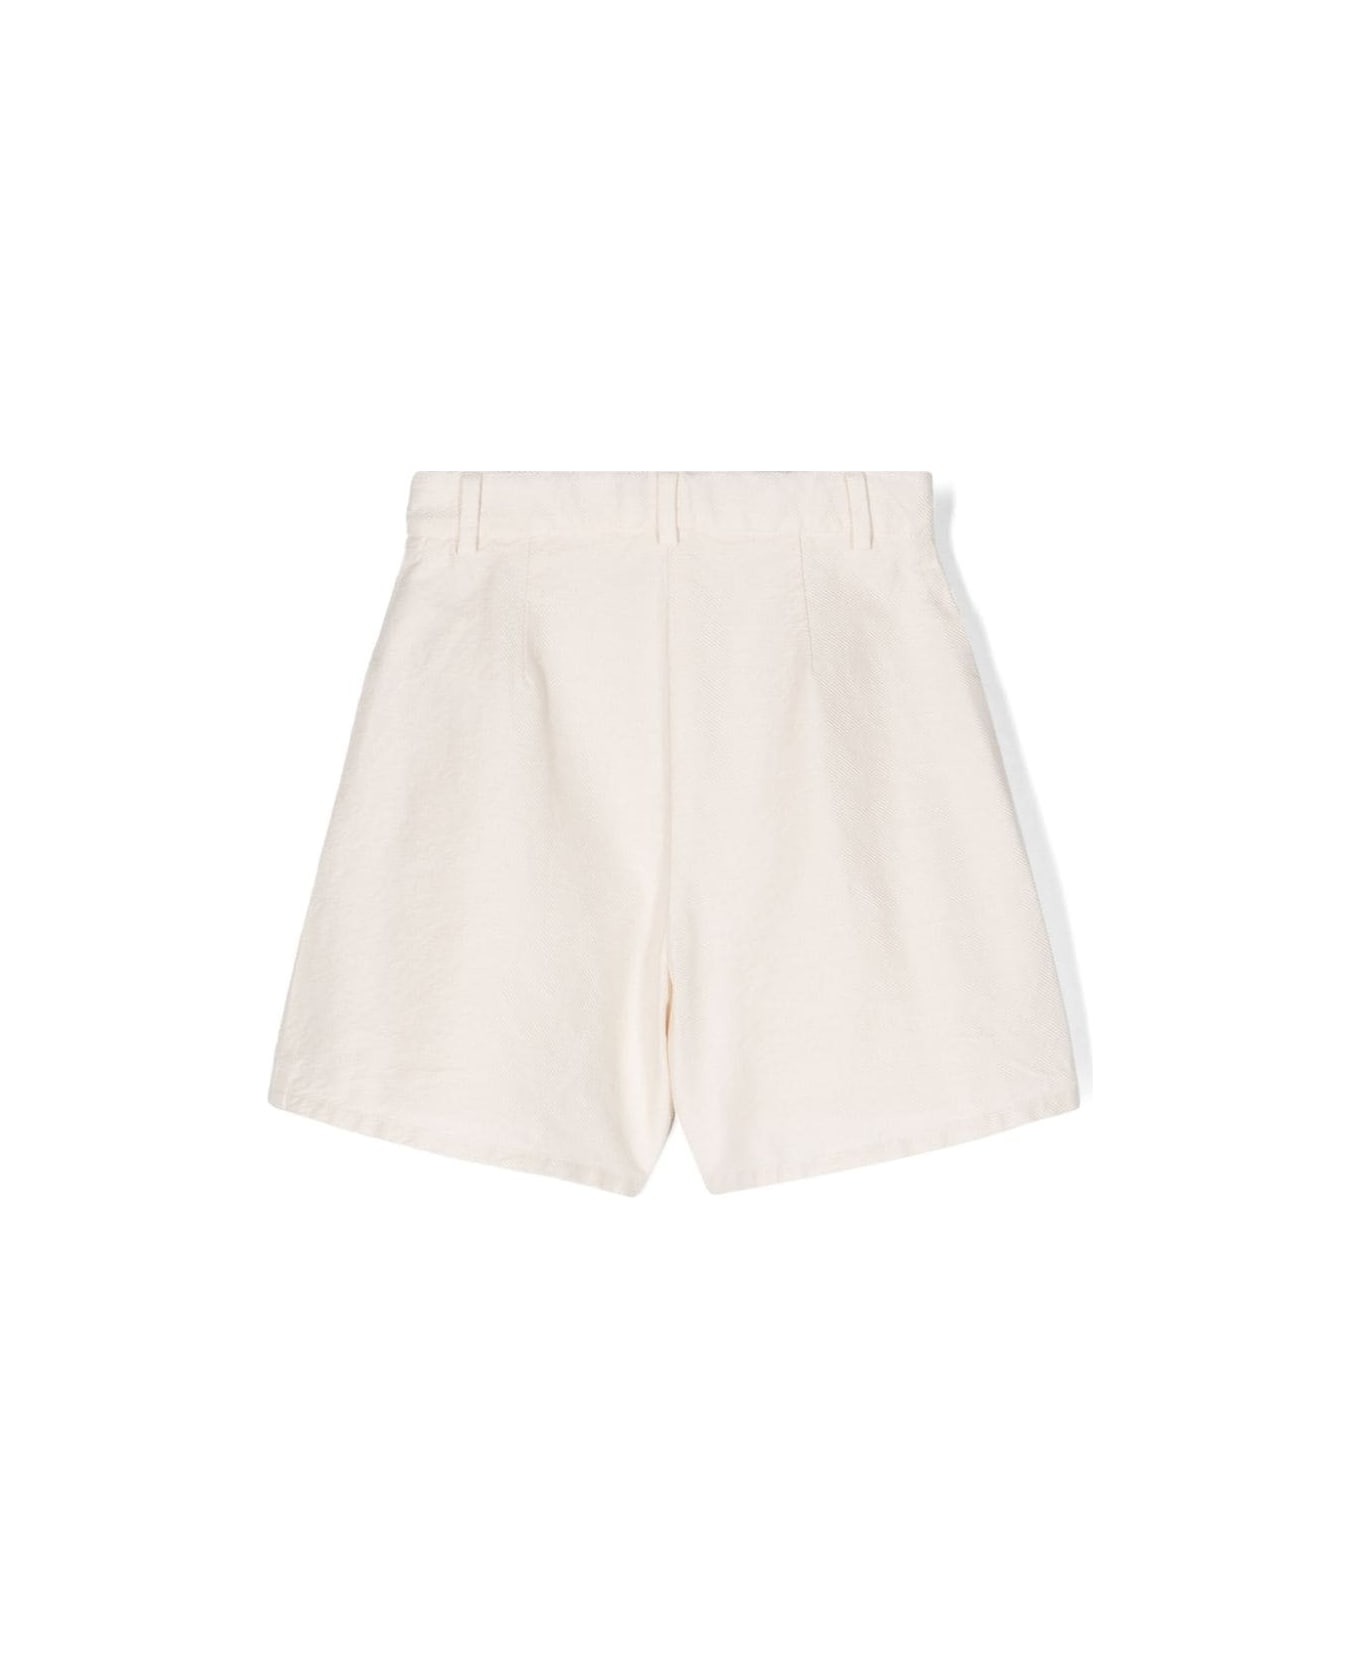 Missoni Kids Light Beige Wide Leg Shorts With Pences - White ボトムス